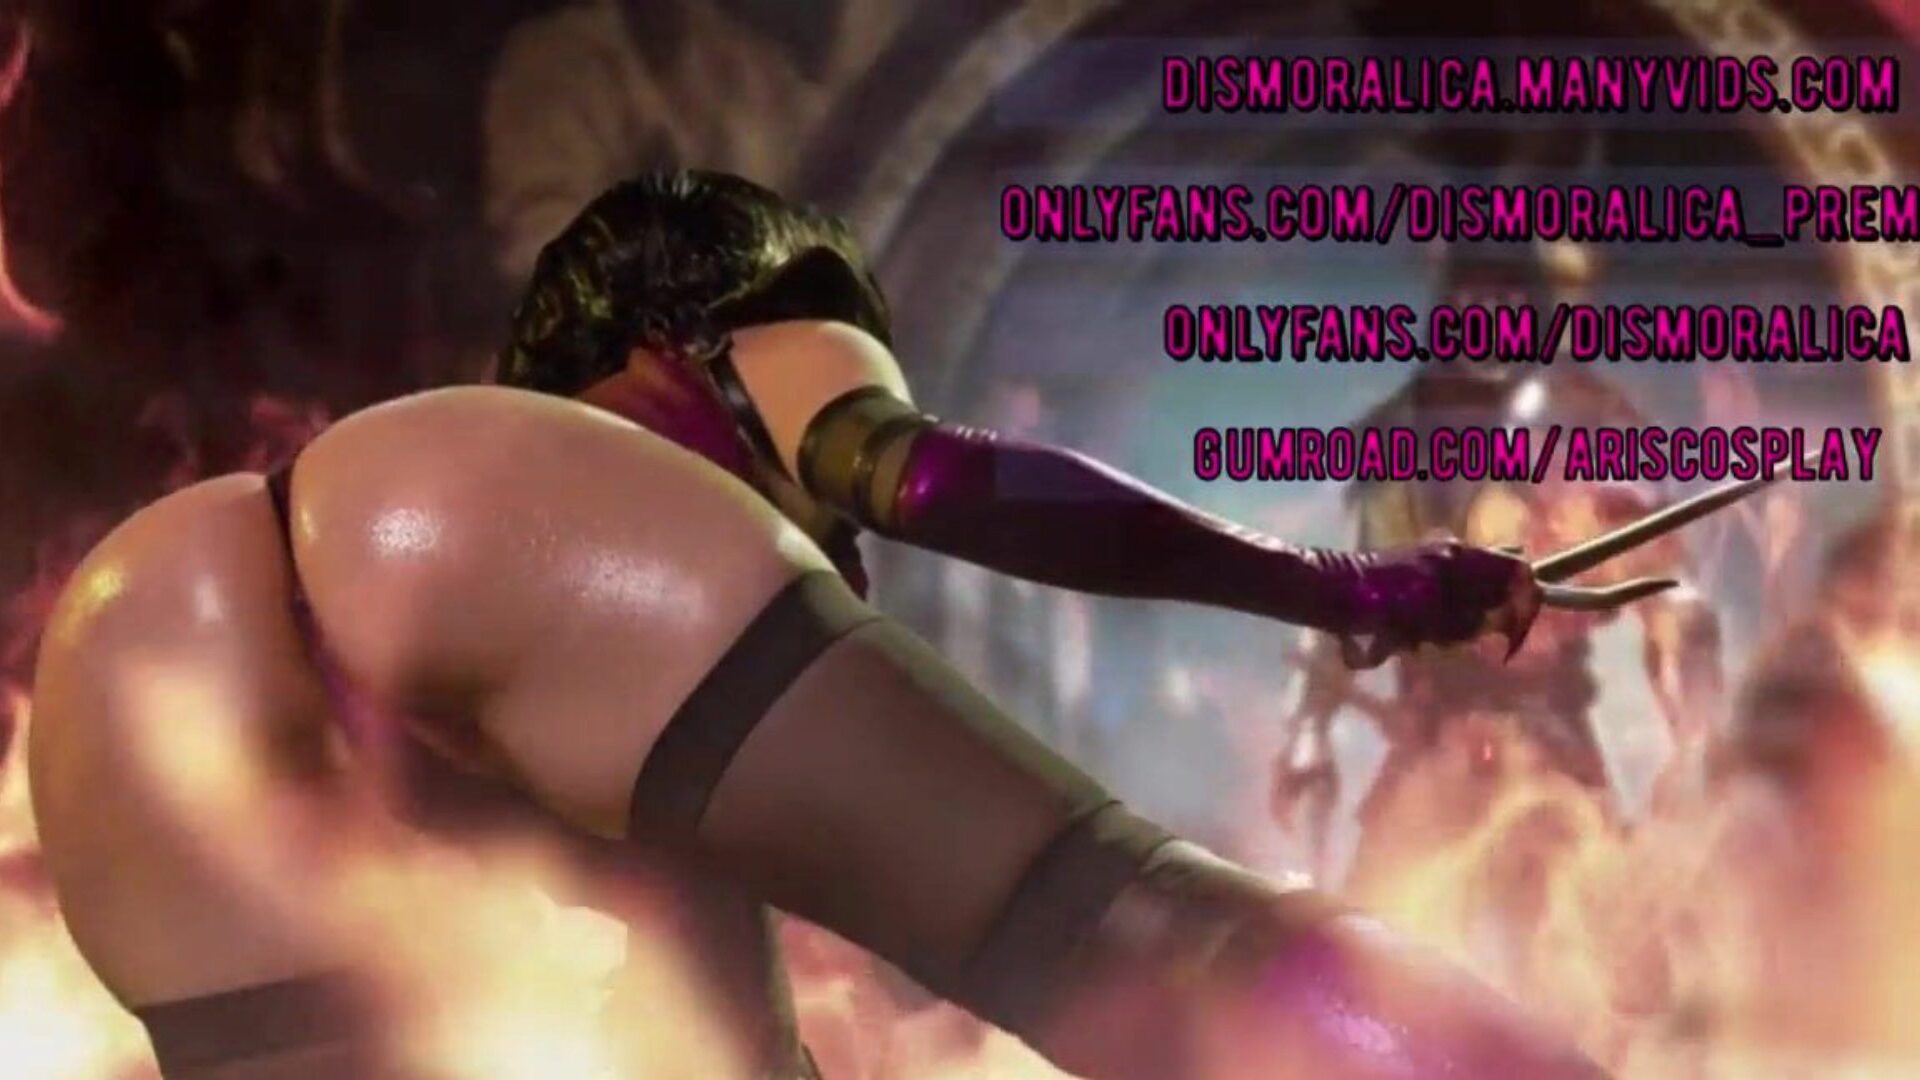 FISTALITY - Mortal CUMButt - Mileena's Asshole was absolutely FINISHED